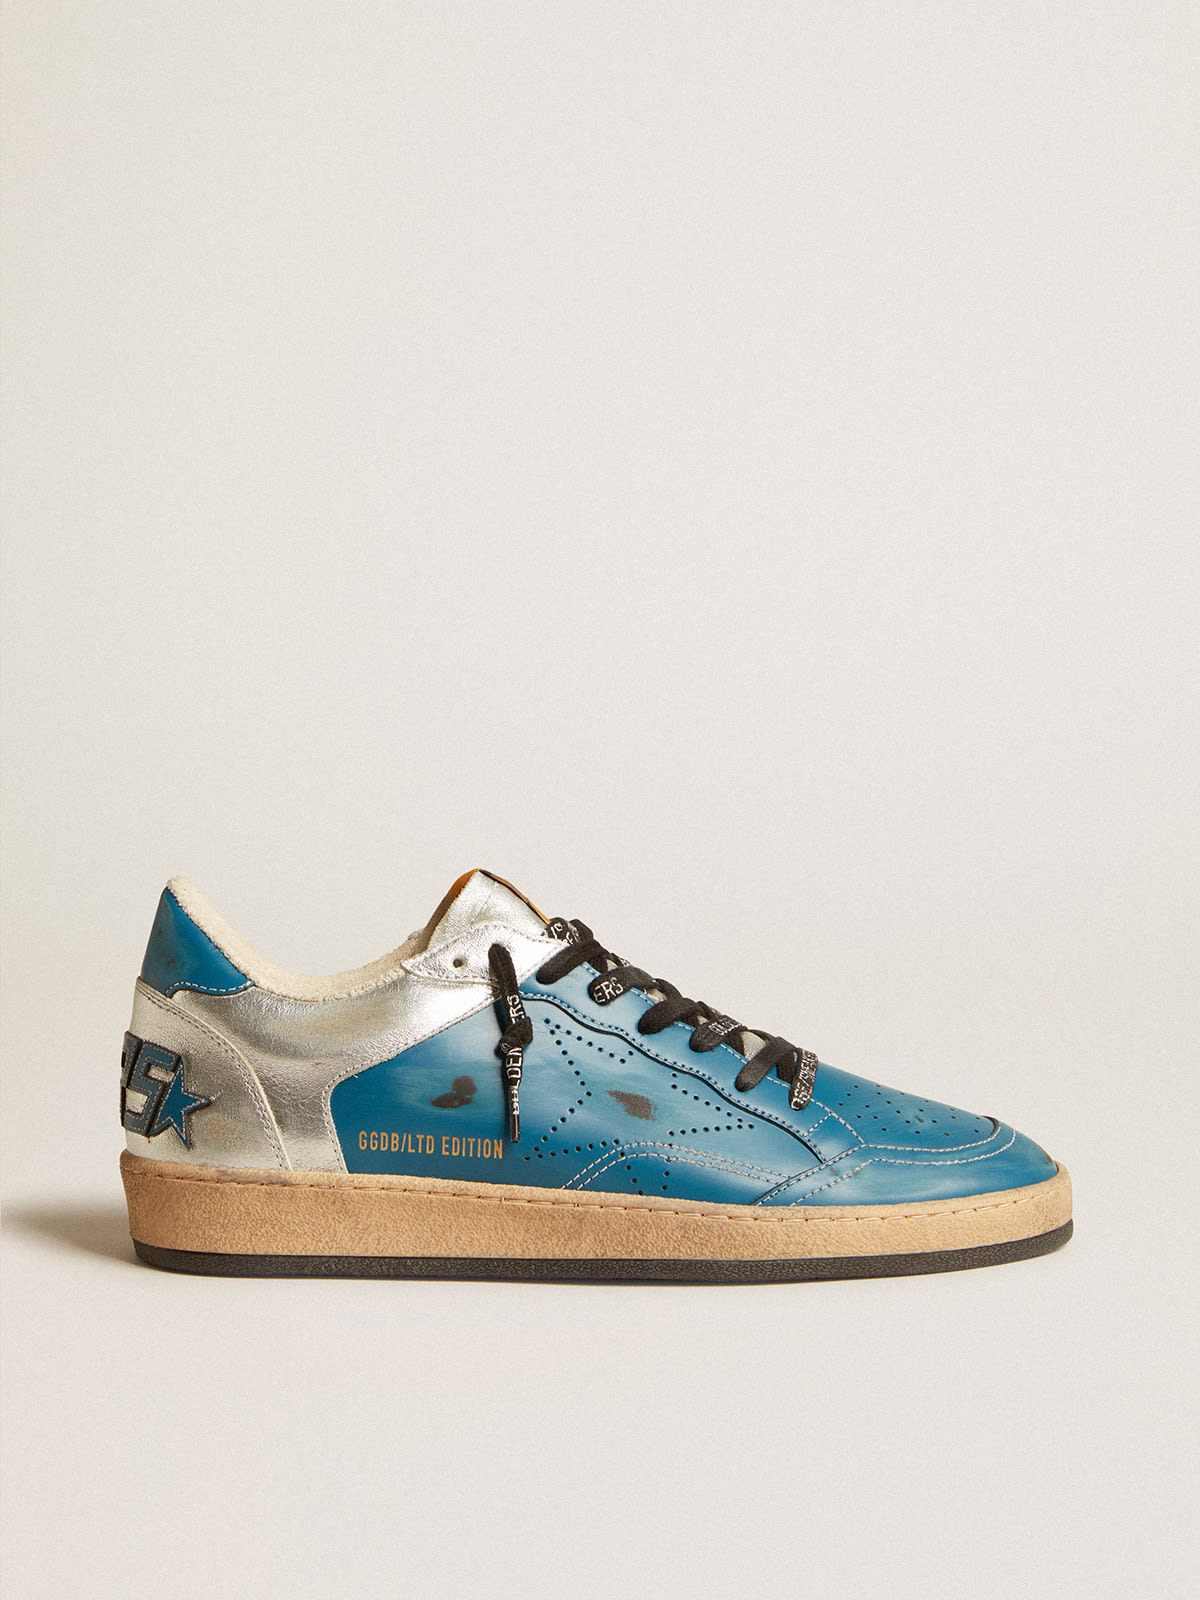 Ball Star LAB in glossy blue and silver leather with perforated star |  Golden Goose